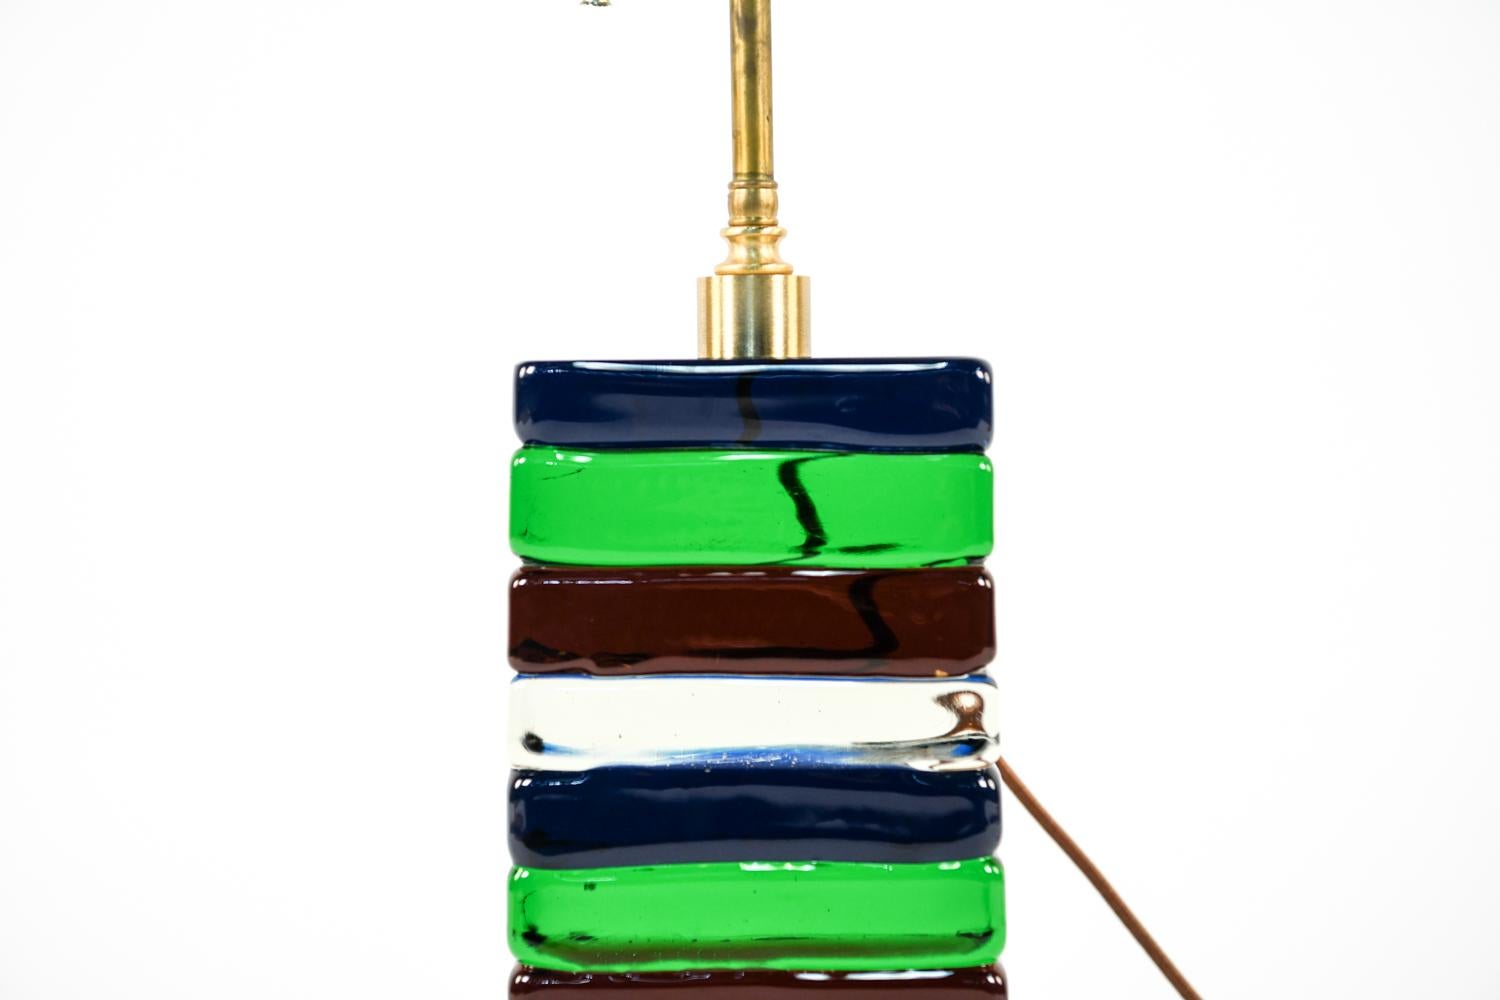 This stunning Italian contemporary table lamp by Cenedese features colorful, stacked Murano glass and brass hardware giving it an exquisite appearance when light shines through.